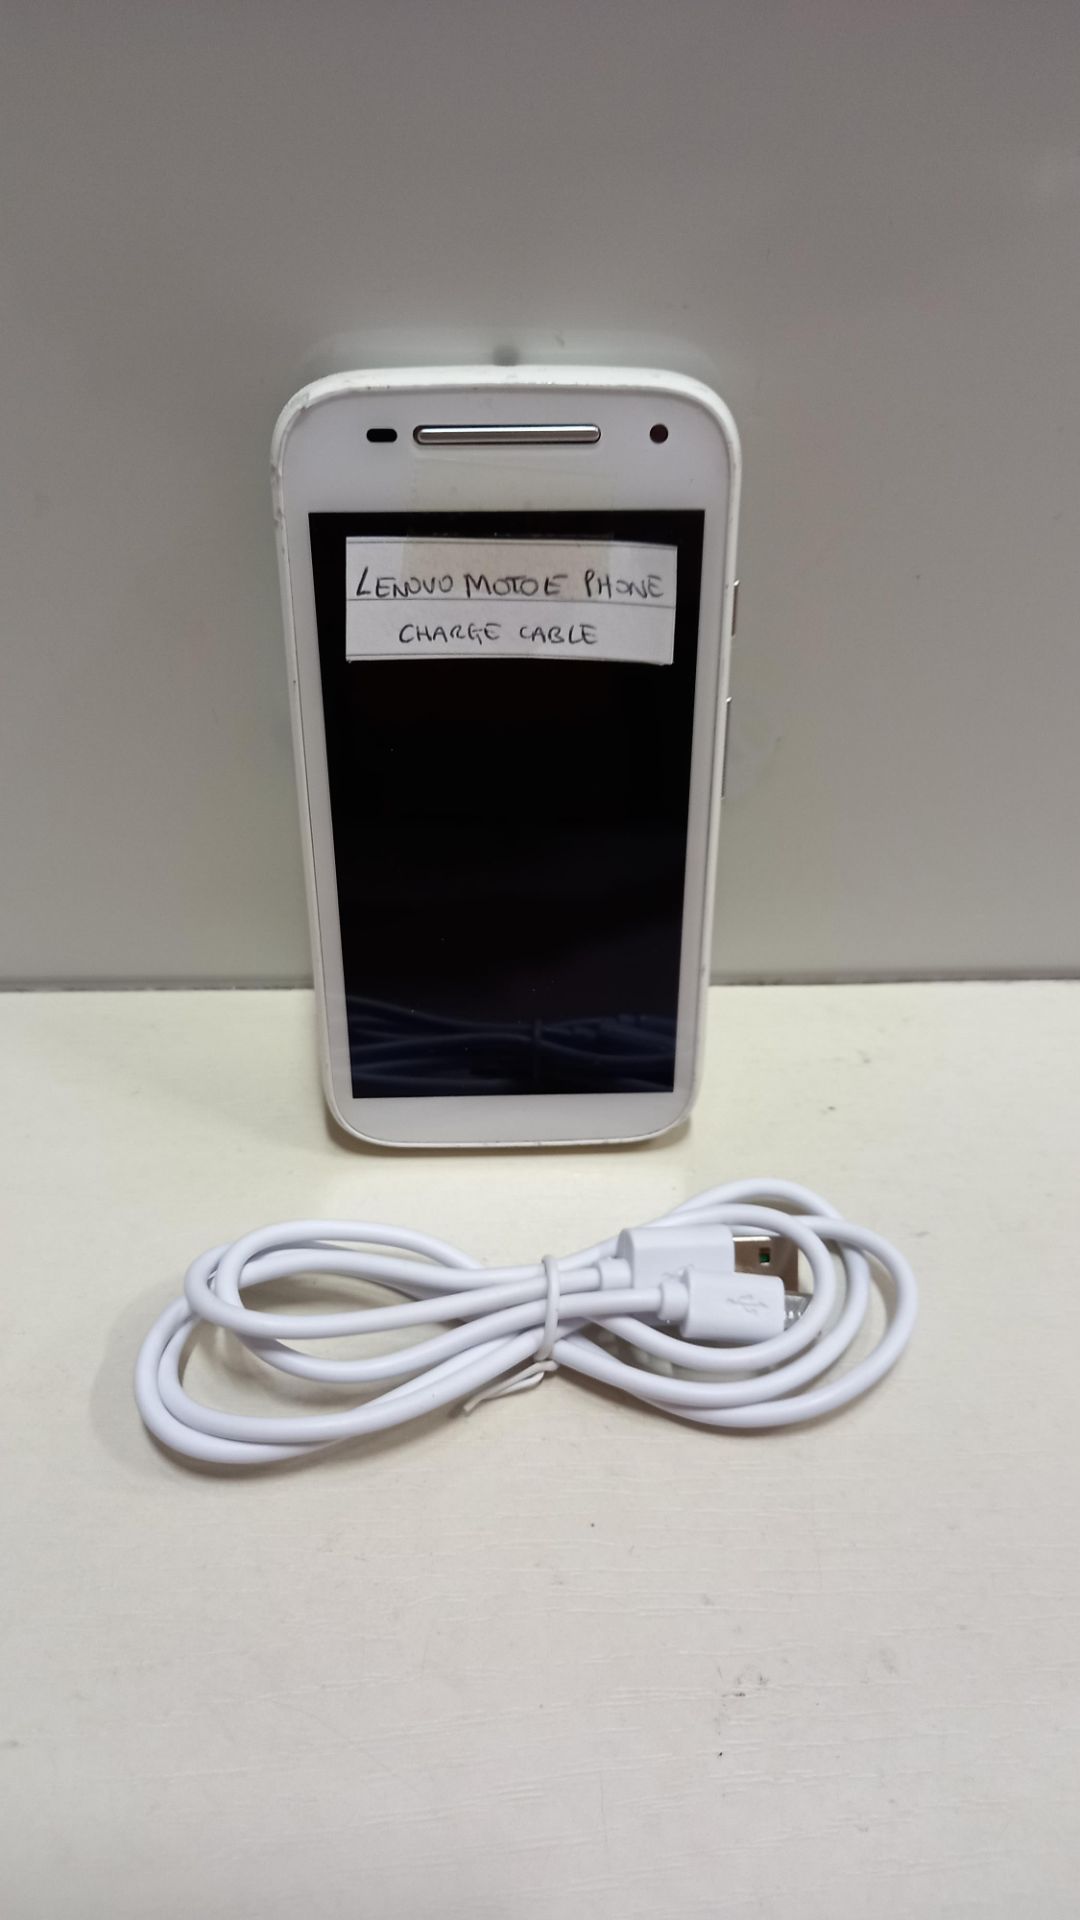 LENOVO MOTO E PHONE - WITH CHARGING CABLE